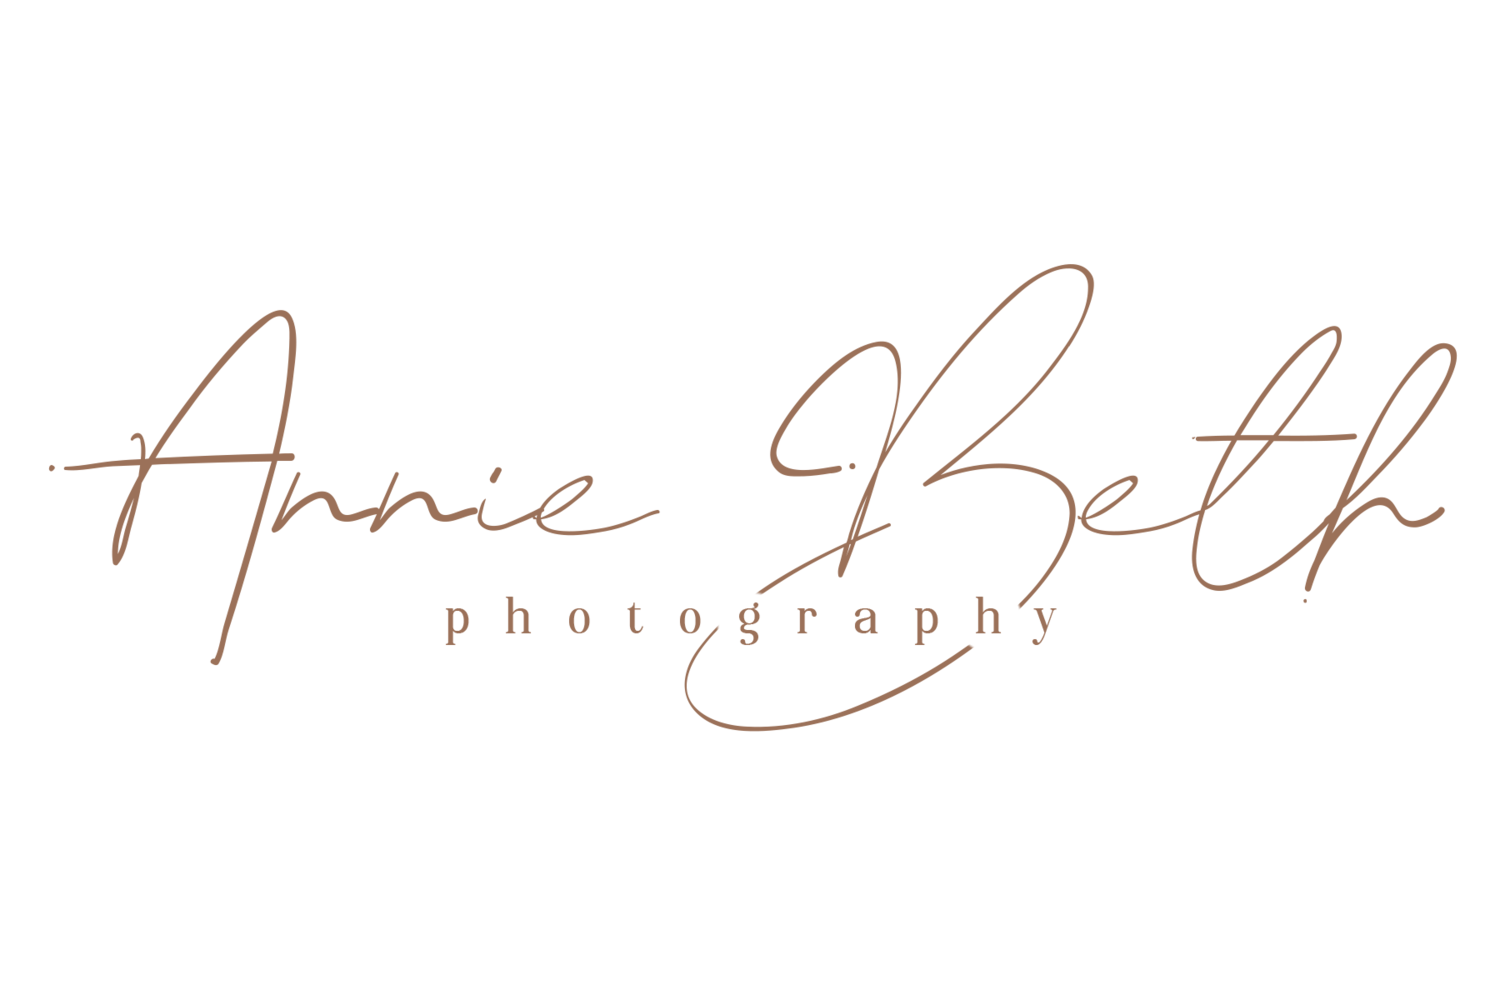 Annie Beth Photography | Family photography Adelaide